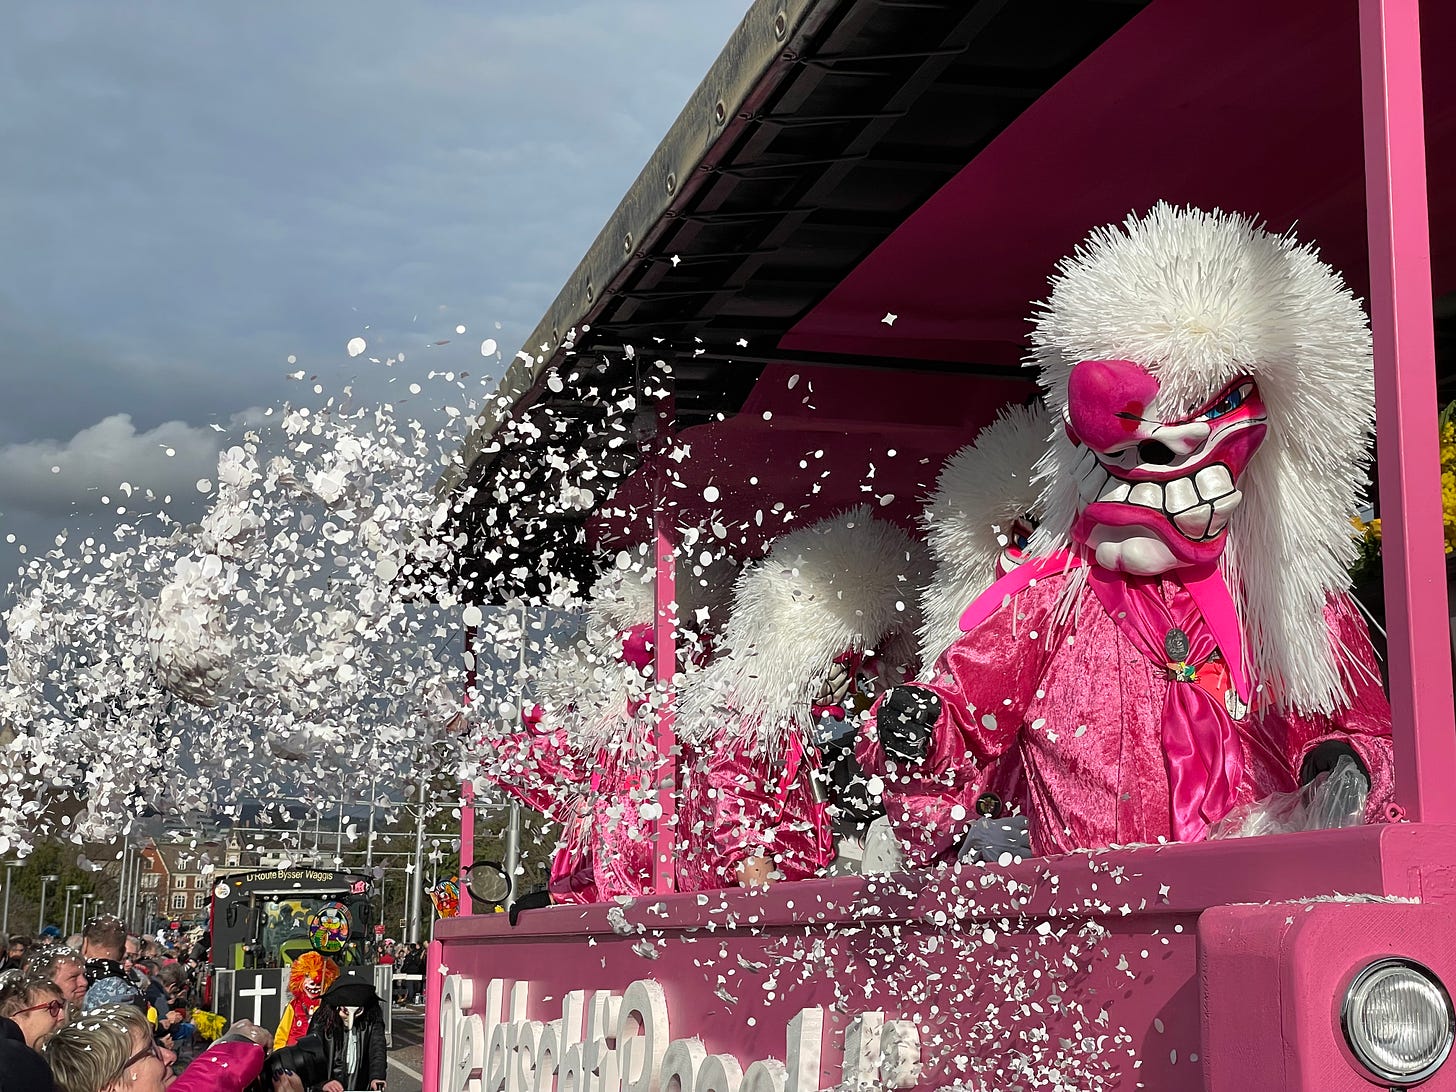 A pink and white Waggis throws confetti at Basel's Fasnacht.